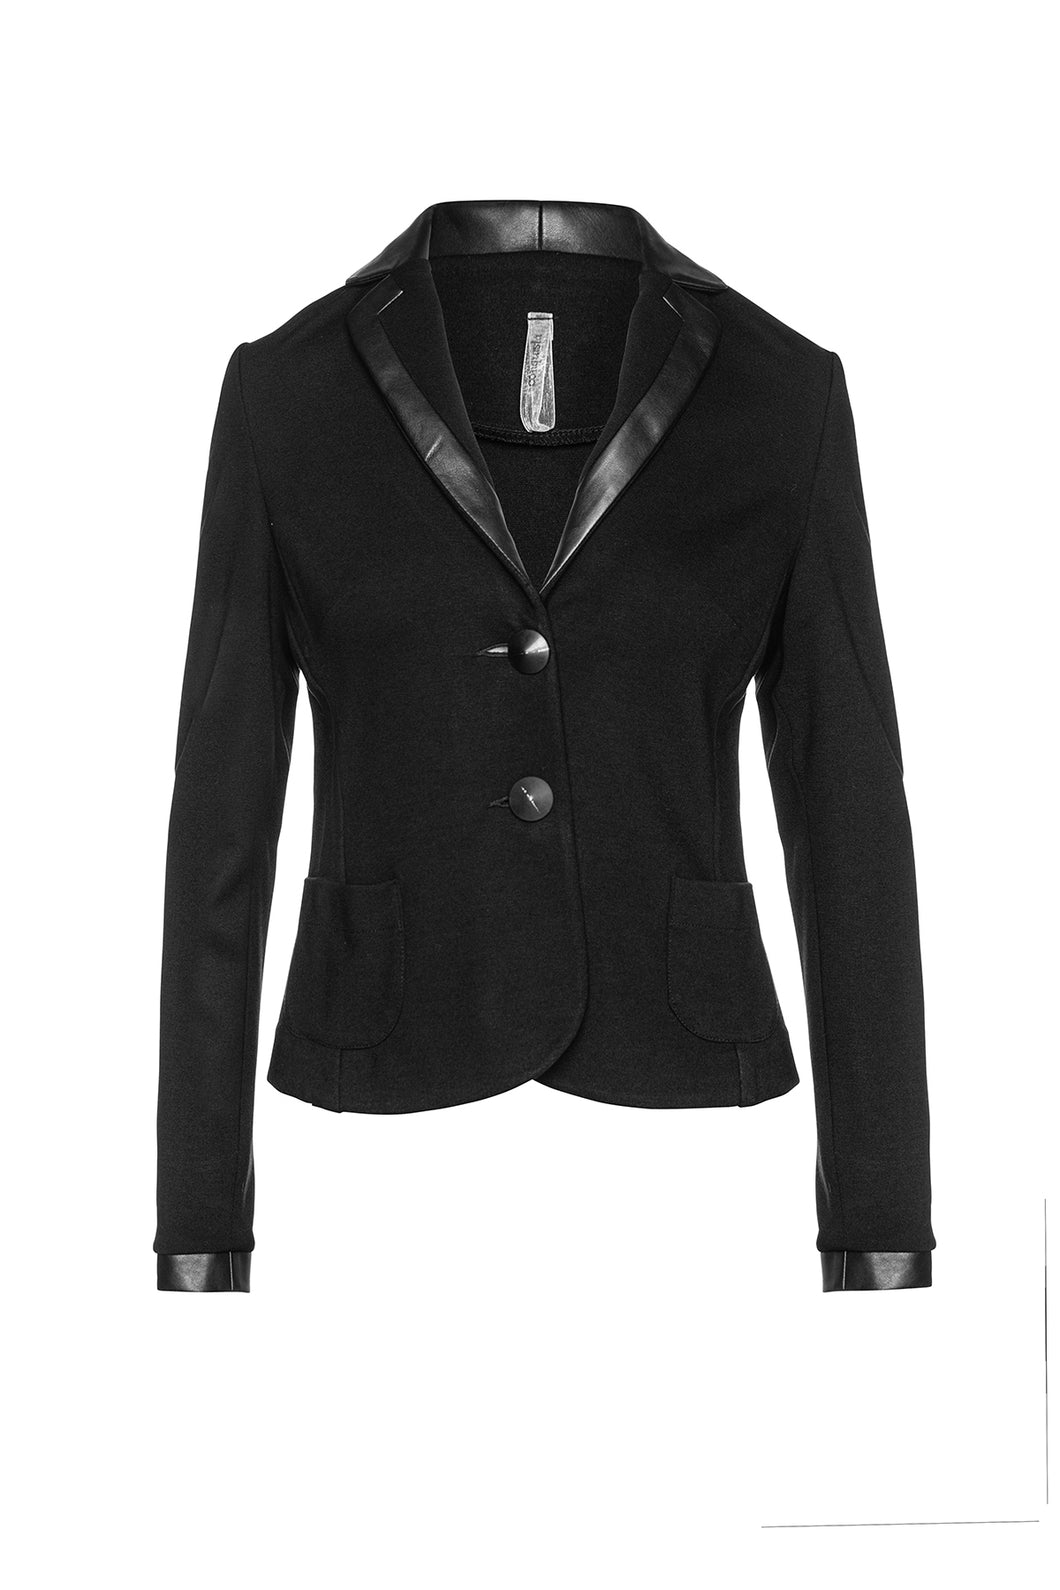 Black Fitted Jacket with Faux Leather Detail